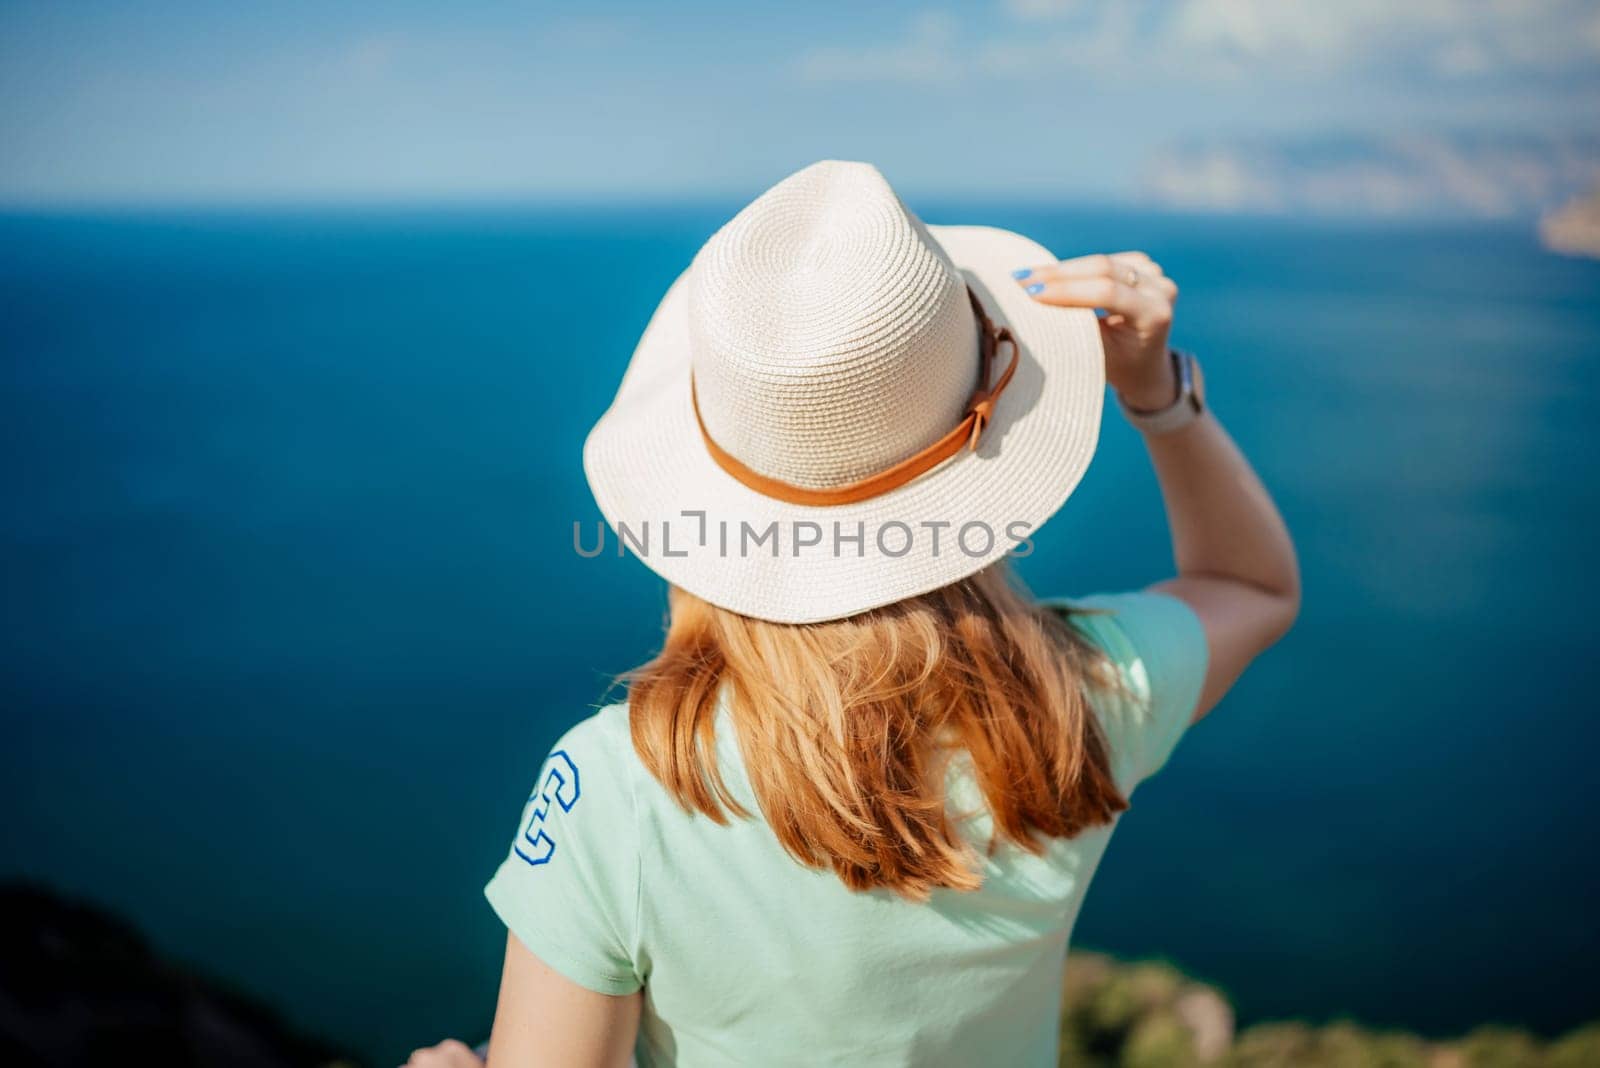 A woman wearing a straw hat is standing on a beach looking out at the ocean by Matiunina